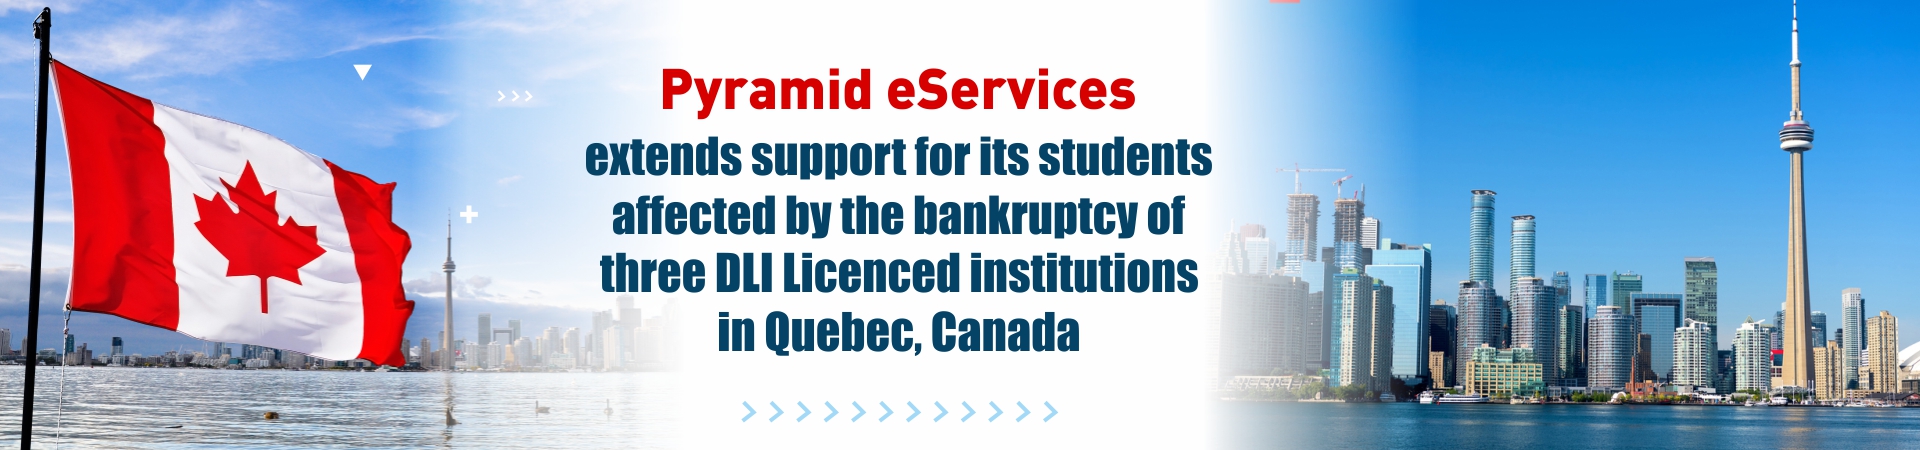 Pyramid eServices extends support for its students affected by the bankruptcy of three DLI institutions in Quebec, Canada